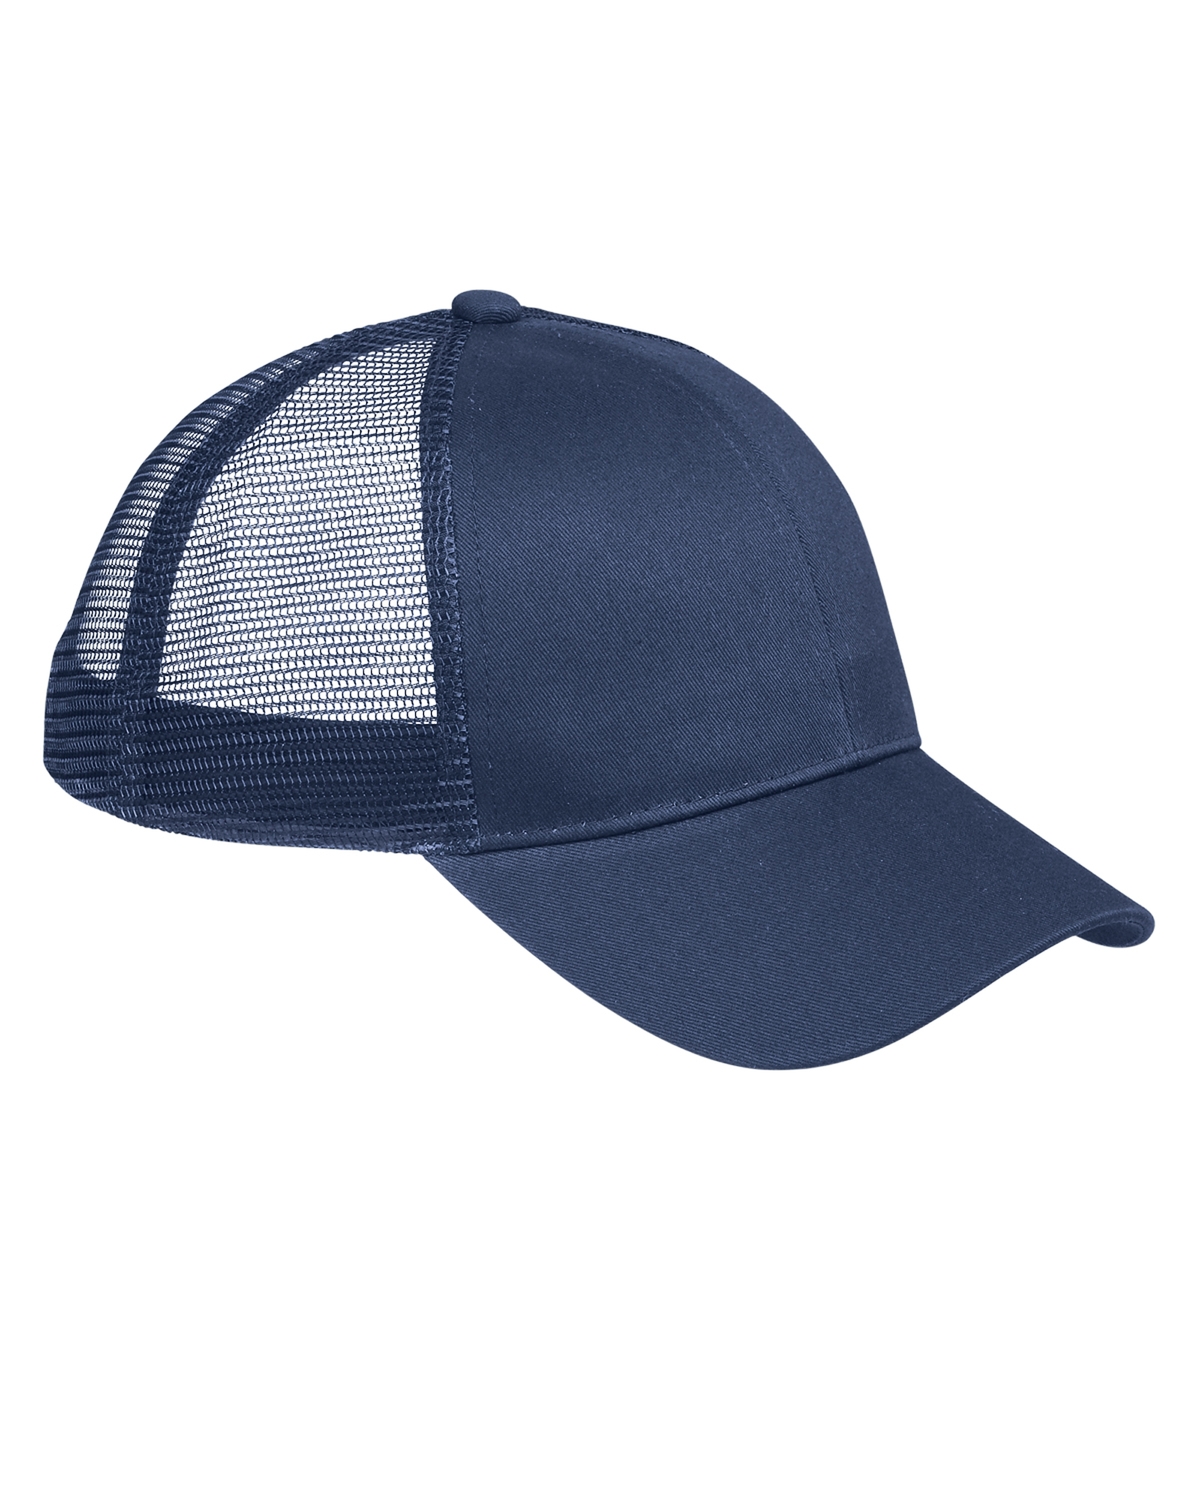 WOMEN FASHION Accessories Hat and cap Navy Blue Navy Blue Single discount 80% Superdry Blue visor print 